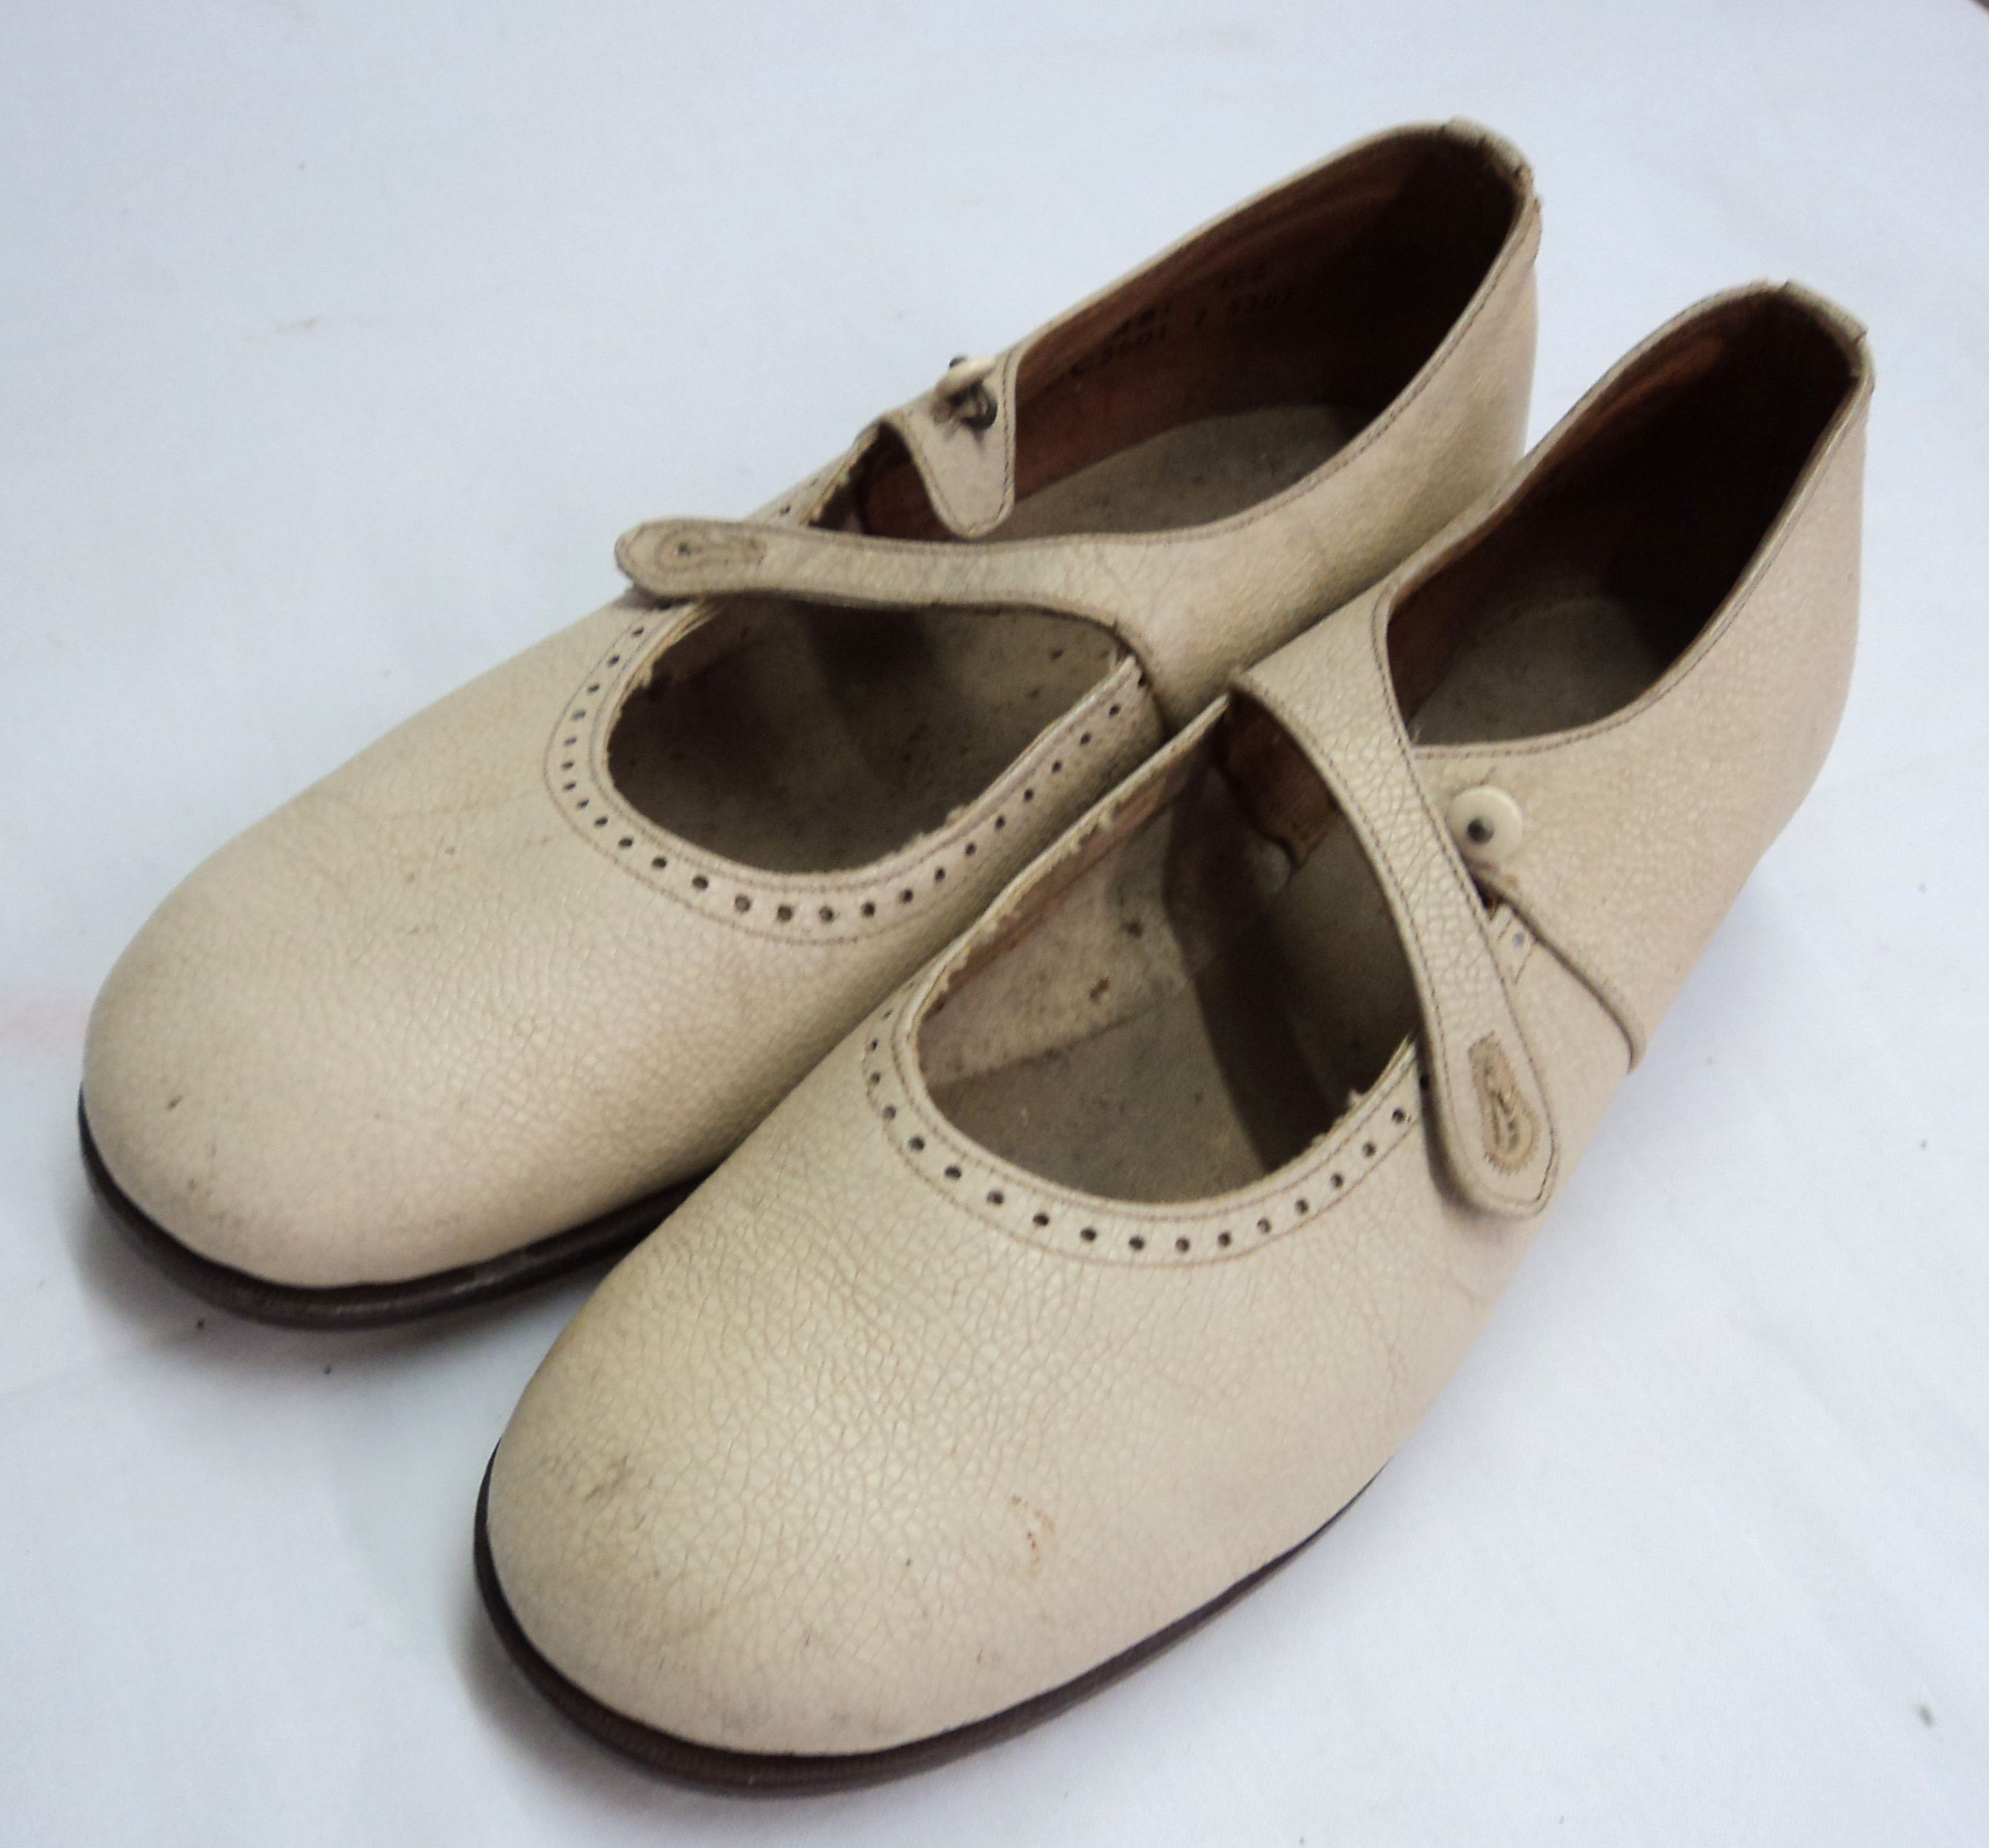 A collection of vintage ladies decorative evening shoes including leather Mary Janes, etc. - Image 6 of 13